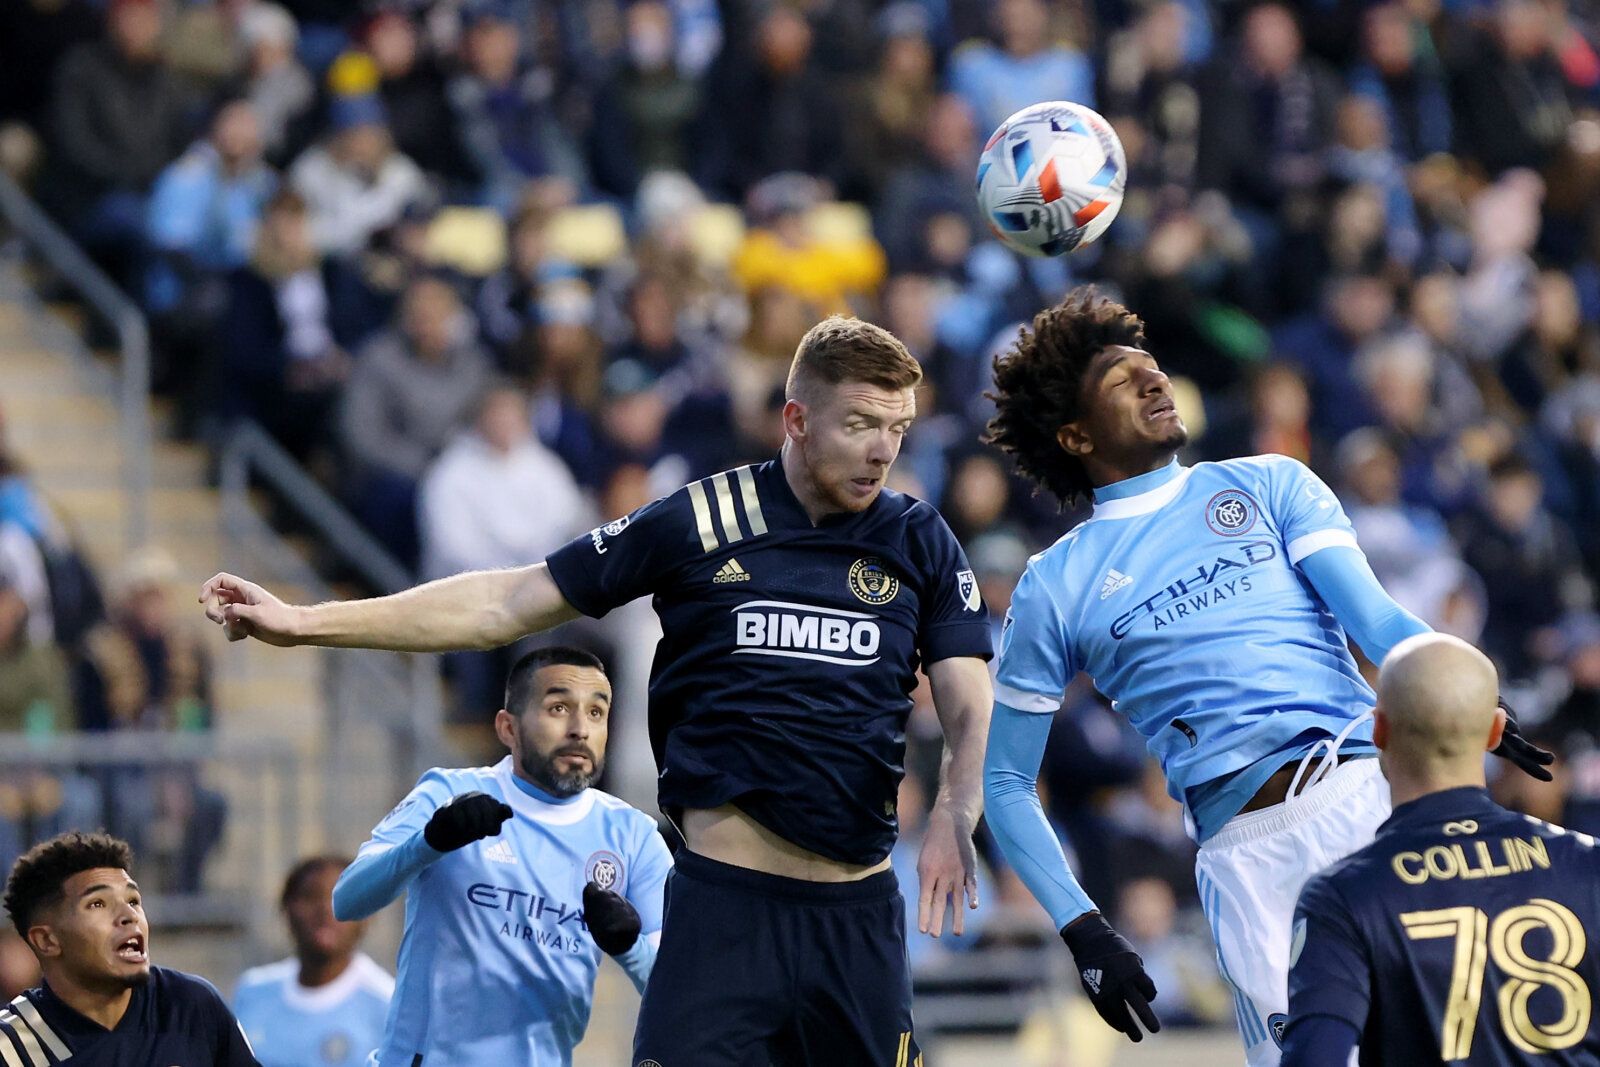 Dec 5, 2021; Chester, PA, USA; Philadelphia Union defender Stuart Findlay (4) battles for the ball with New York City FC forward Talles Magno (43) during the second half of the Eastern Conference Finals of the 2021 MLS Playoffs at Subaru Park. New York City FC won 2-1. Mandatory Credit: Bill Streicher-USA TODAY Sports